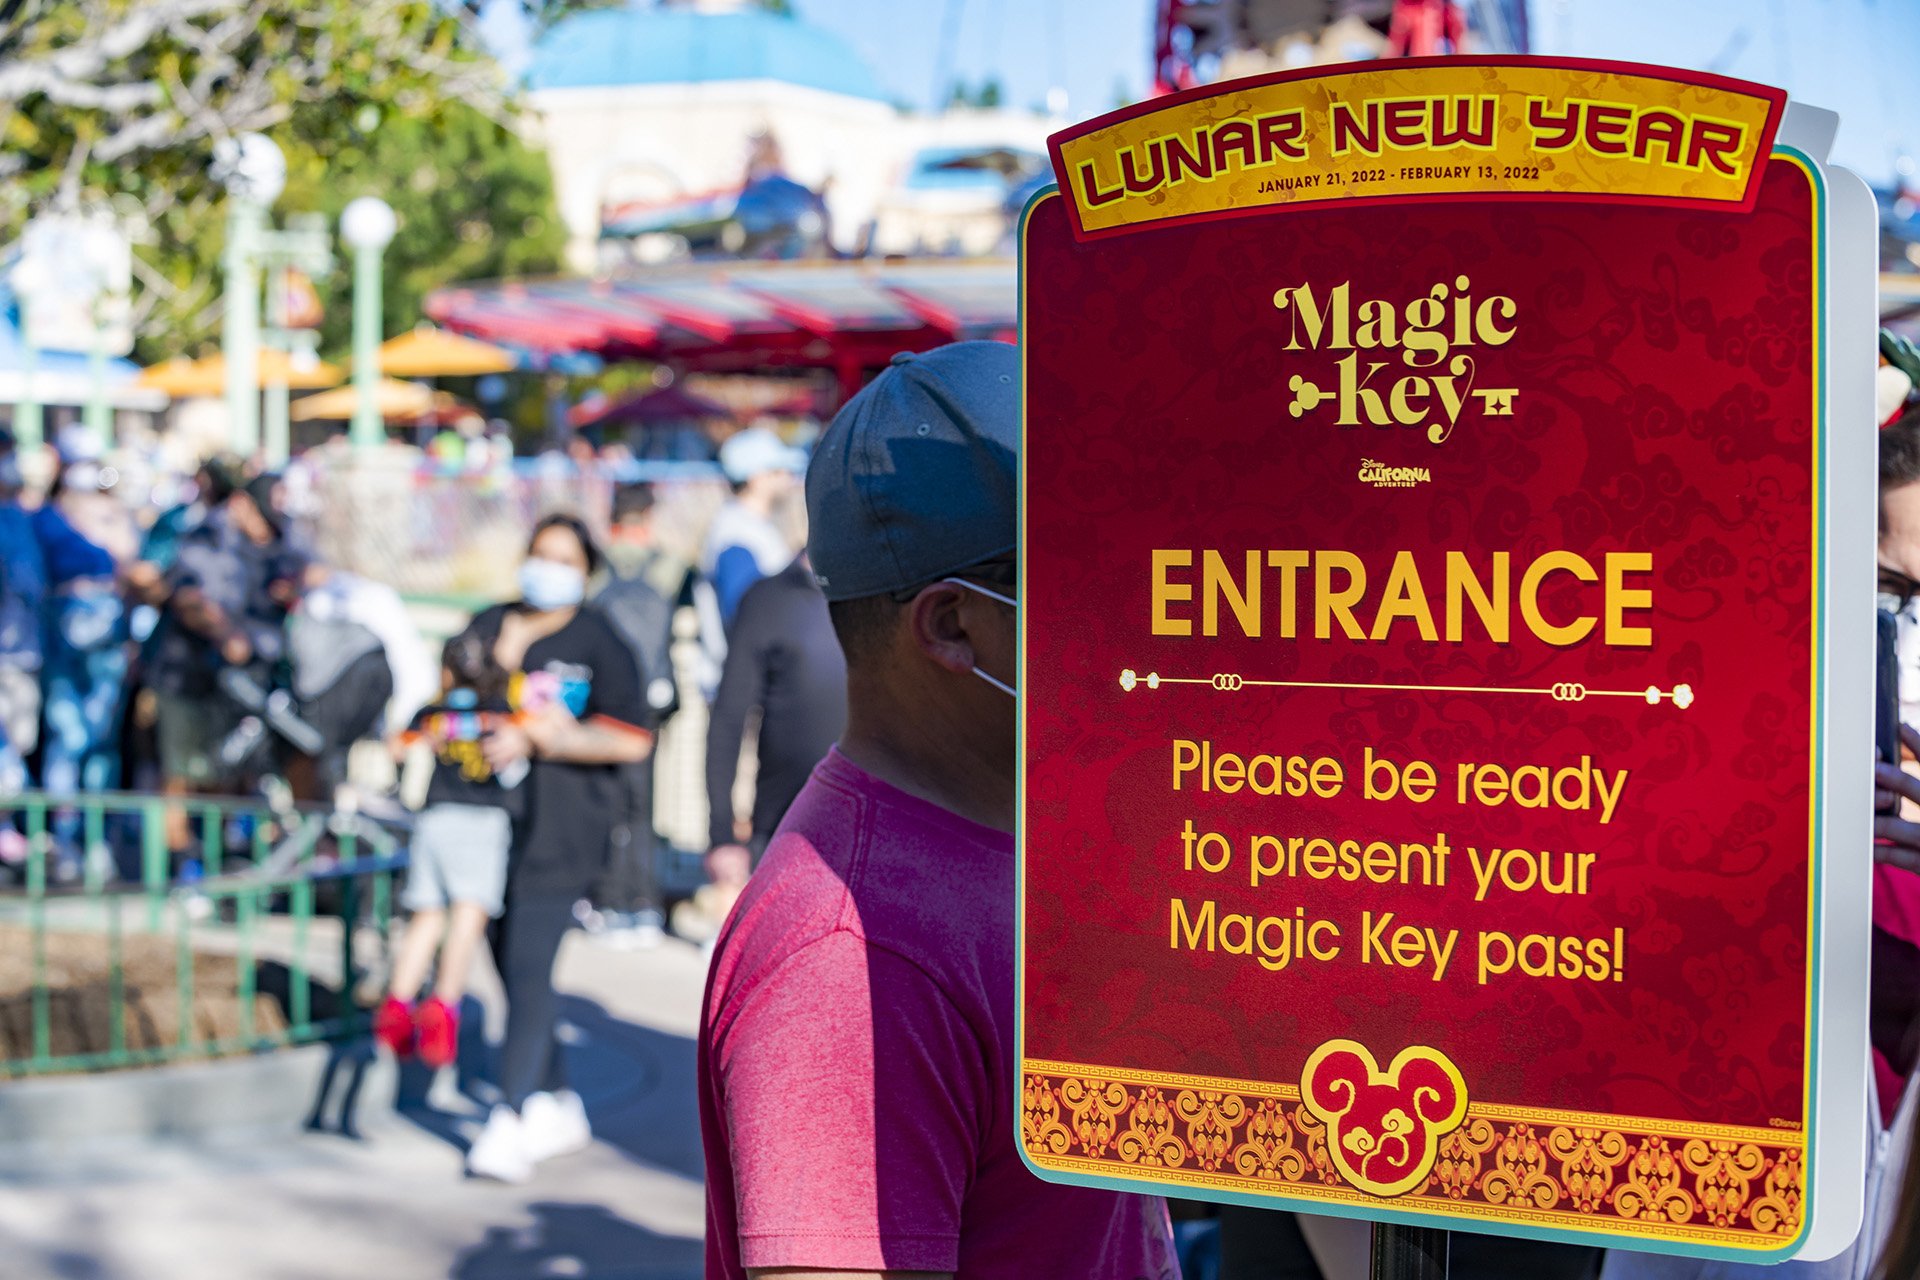  Magic Key holders can receive a special free pin and partake in a special photo op this year. 